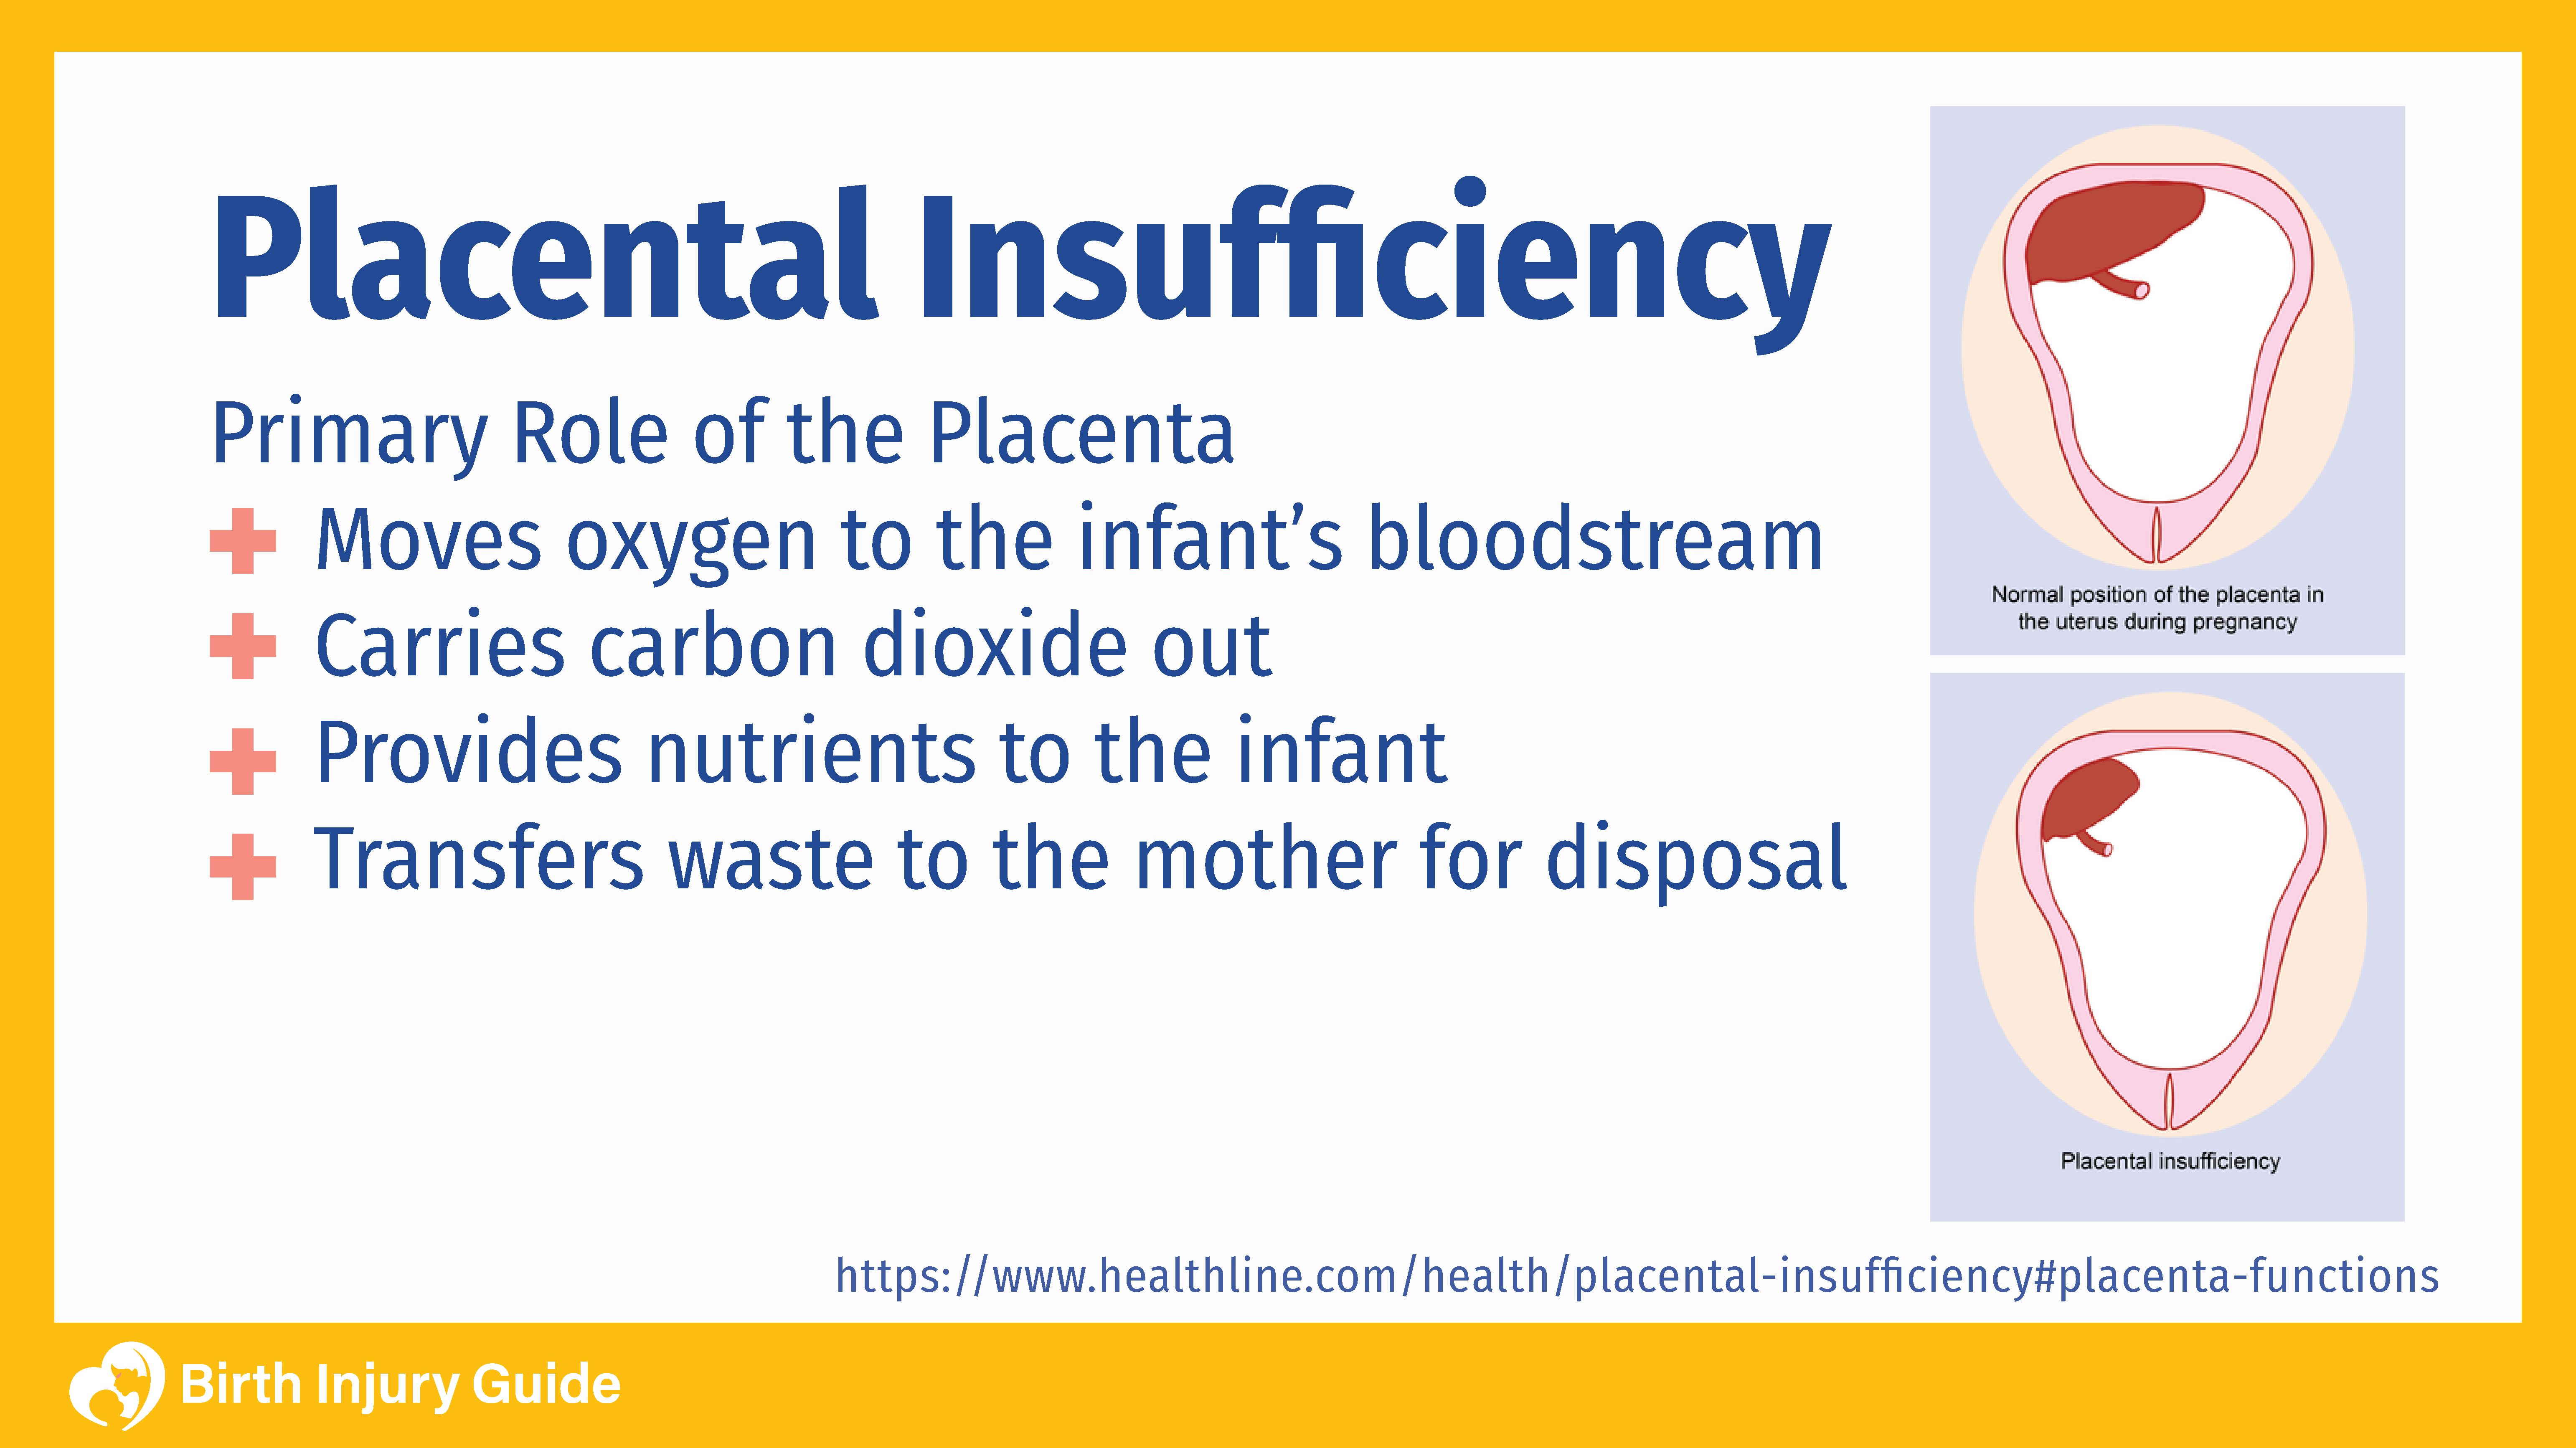 placenta with insufficiency and primary roles of the placenta